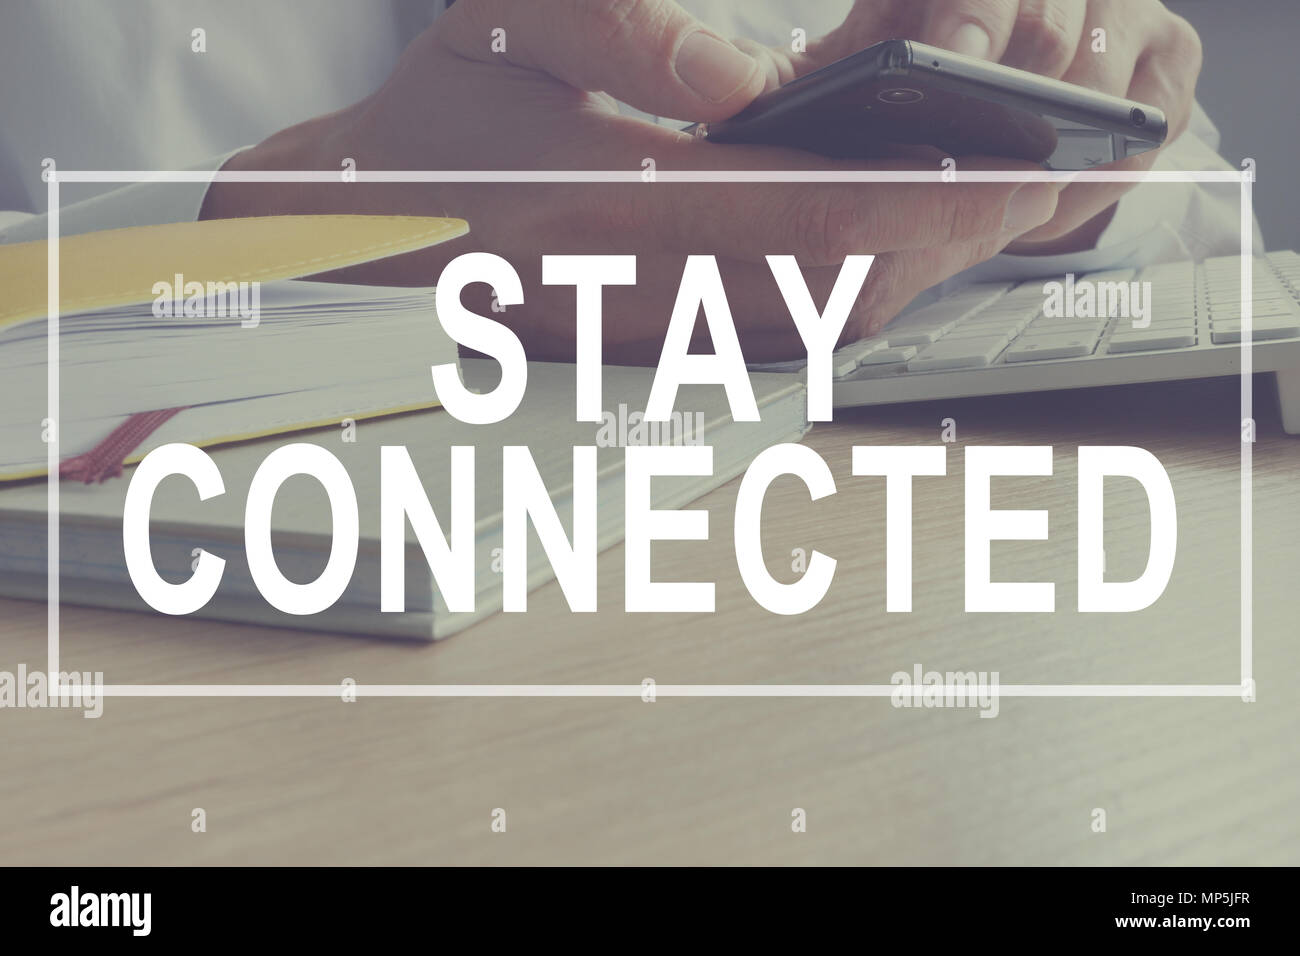 Stay Connected concept. Communication and Social Media. Stock Photo